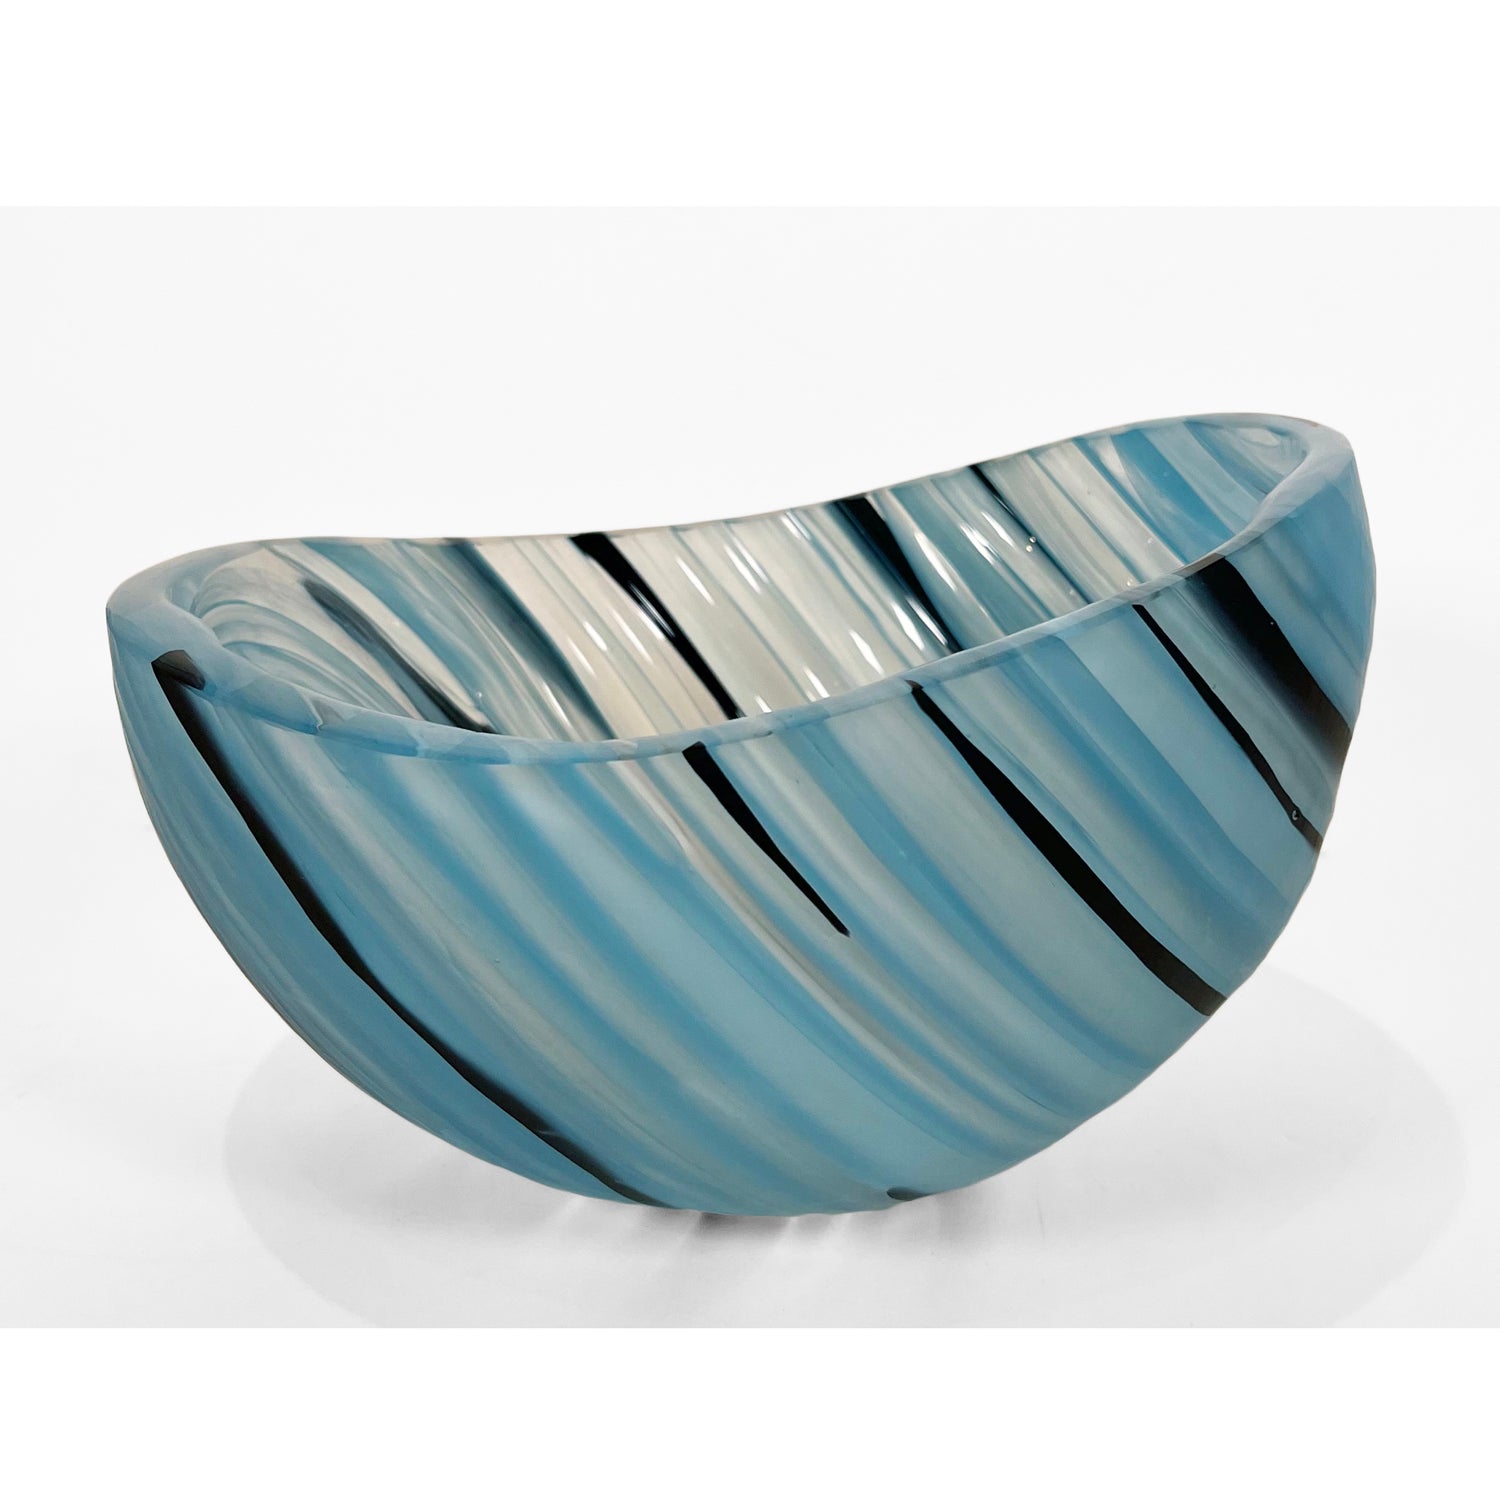 Jaan Andres - Coded Bowl Blue/Black Large, 6" x 10" x 10"